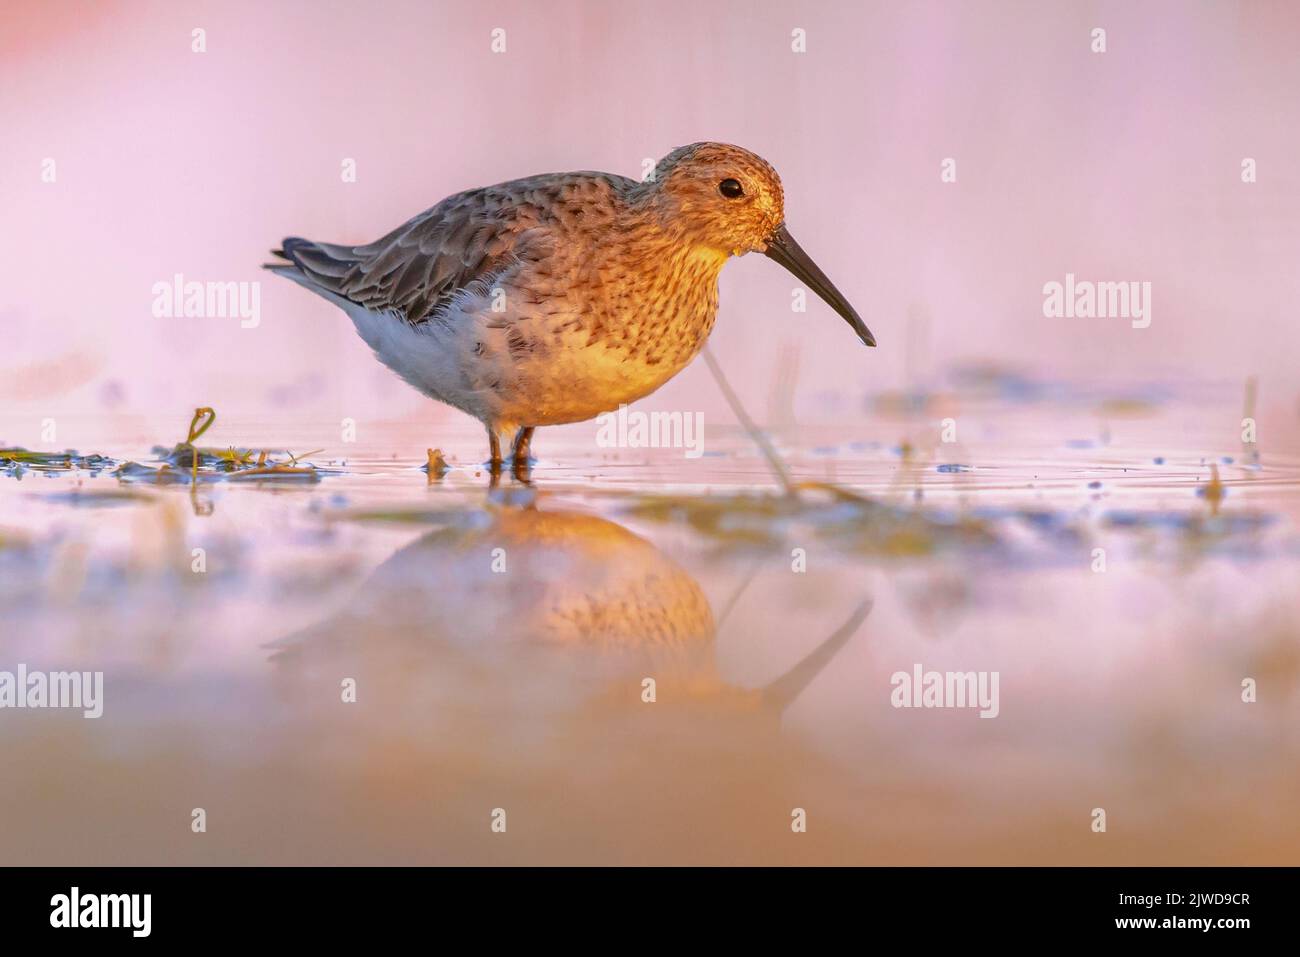 Dunlin (Calidris alpina) is a small Wader. Bird Wading in shallow Water of Wetland during Migration. Extremadura, Spain. Wildlife Scene of Nature in E Stock Photo